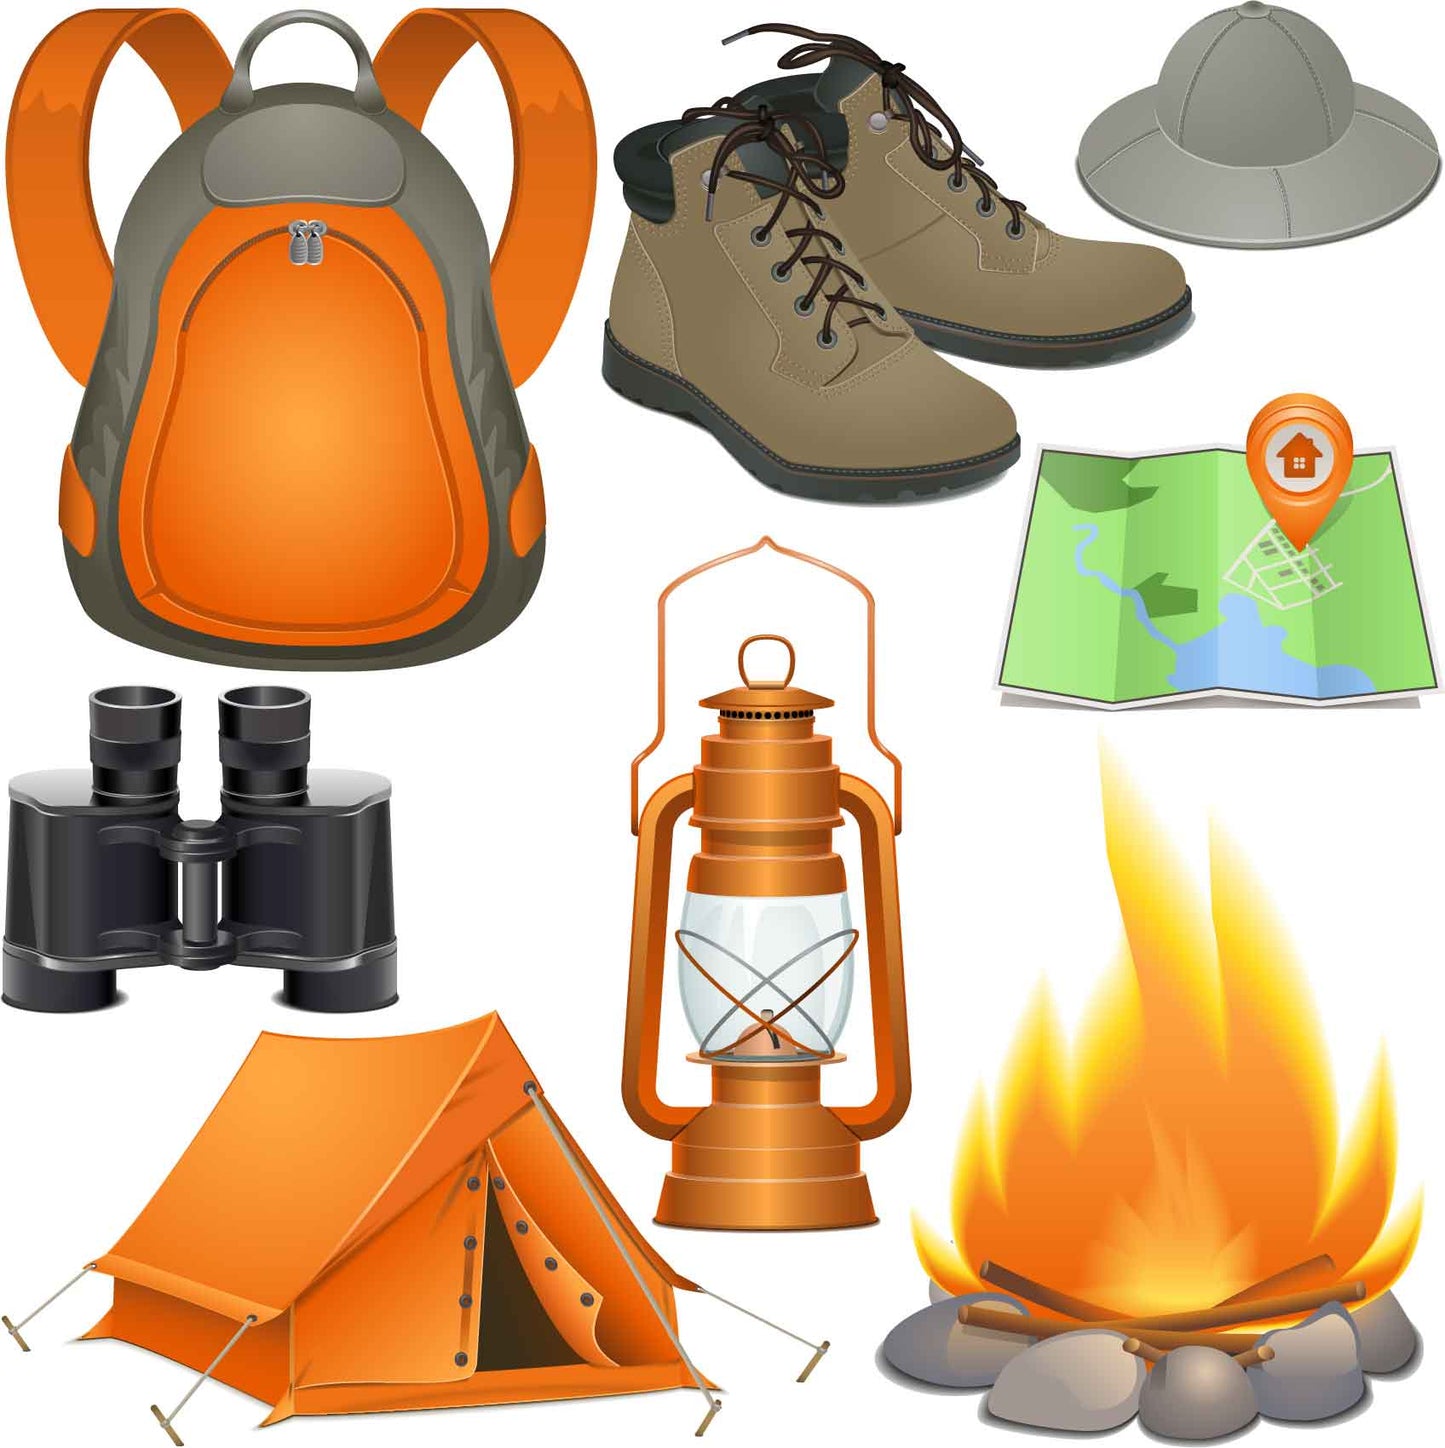 Camping Set 2 Half Sheet Misc. (Must Purchase 2 Half sheets - You Can Mix & Match)